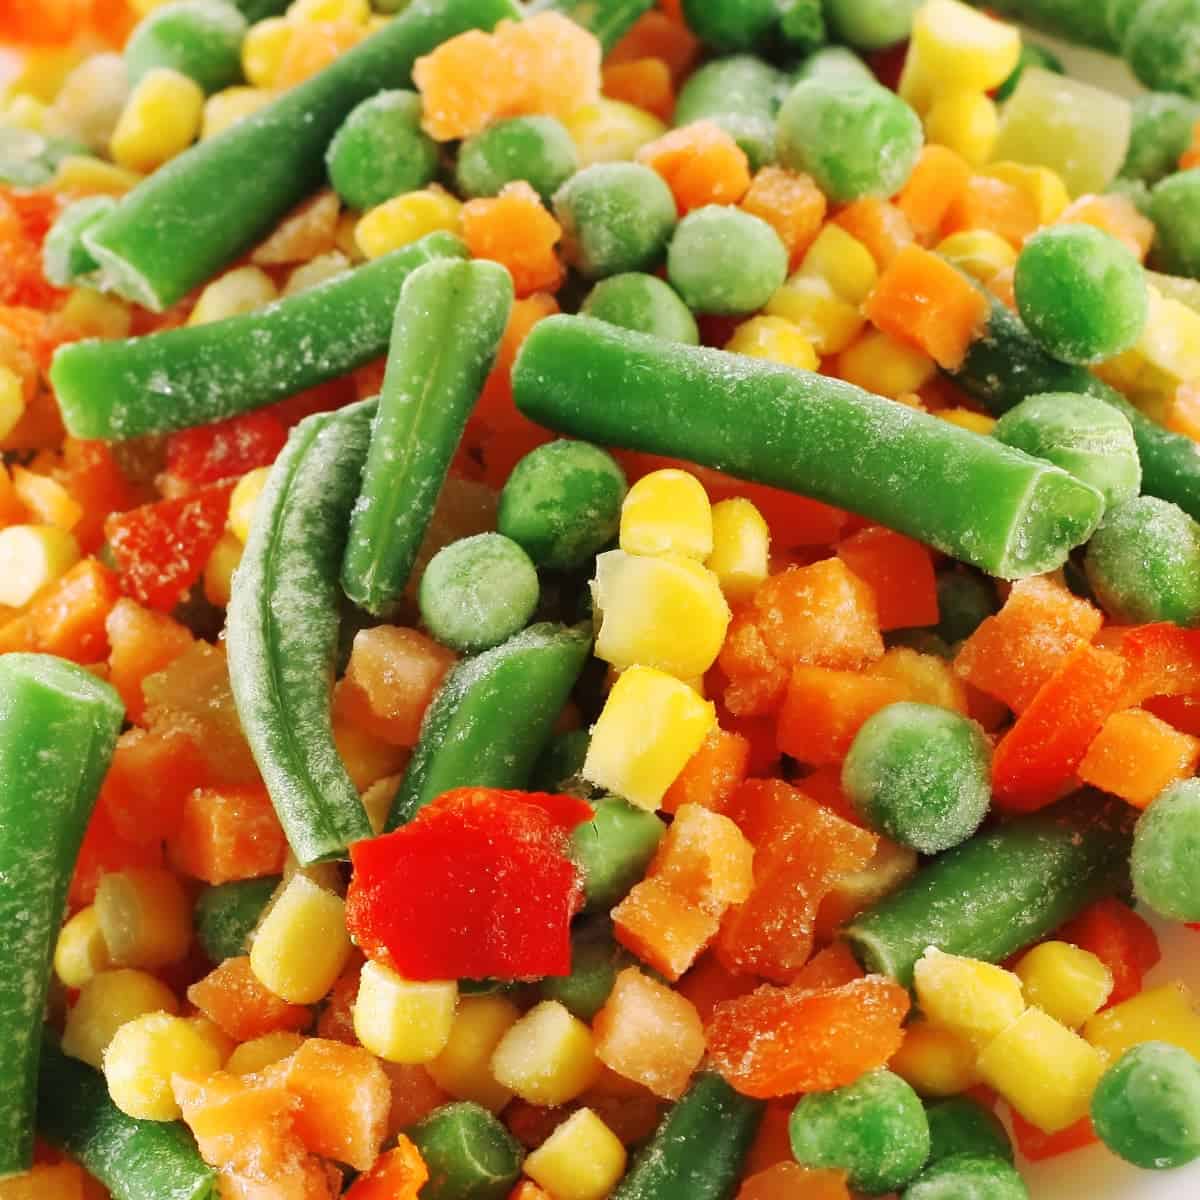 Close up of frozen mixed vegetables, including green beans, carrots, corn and peas.